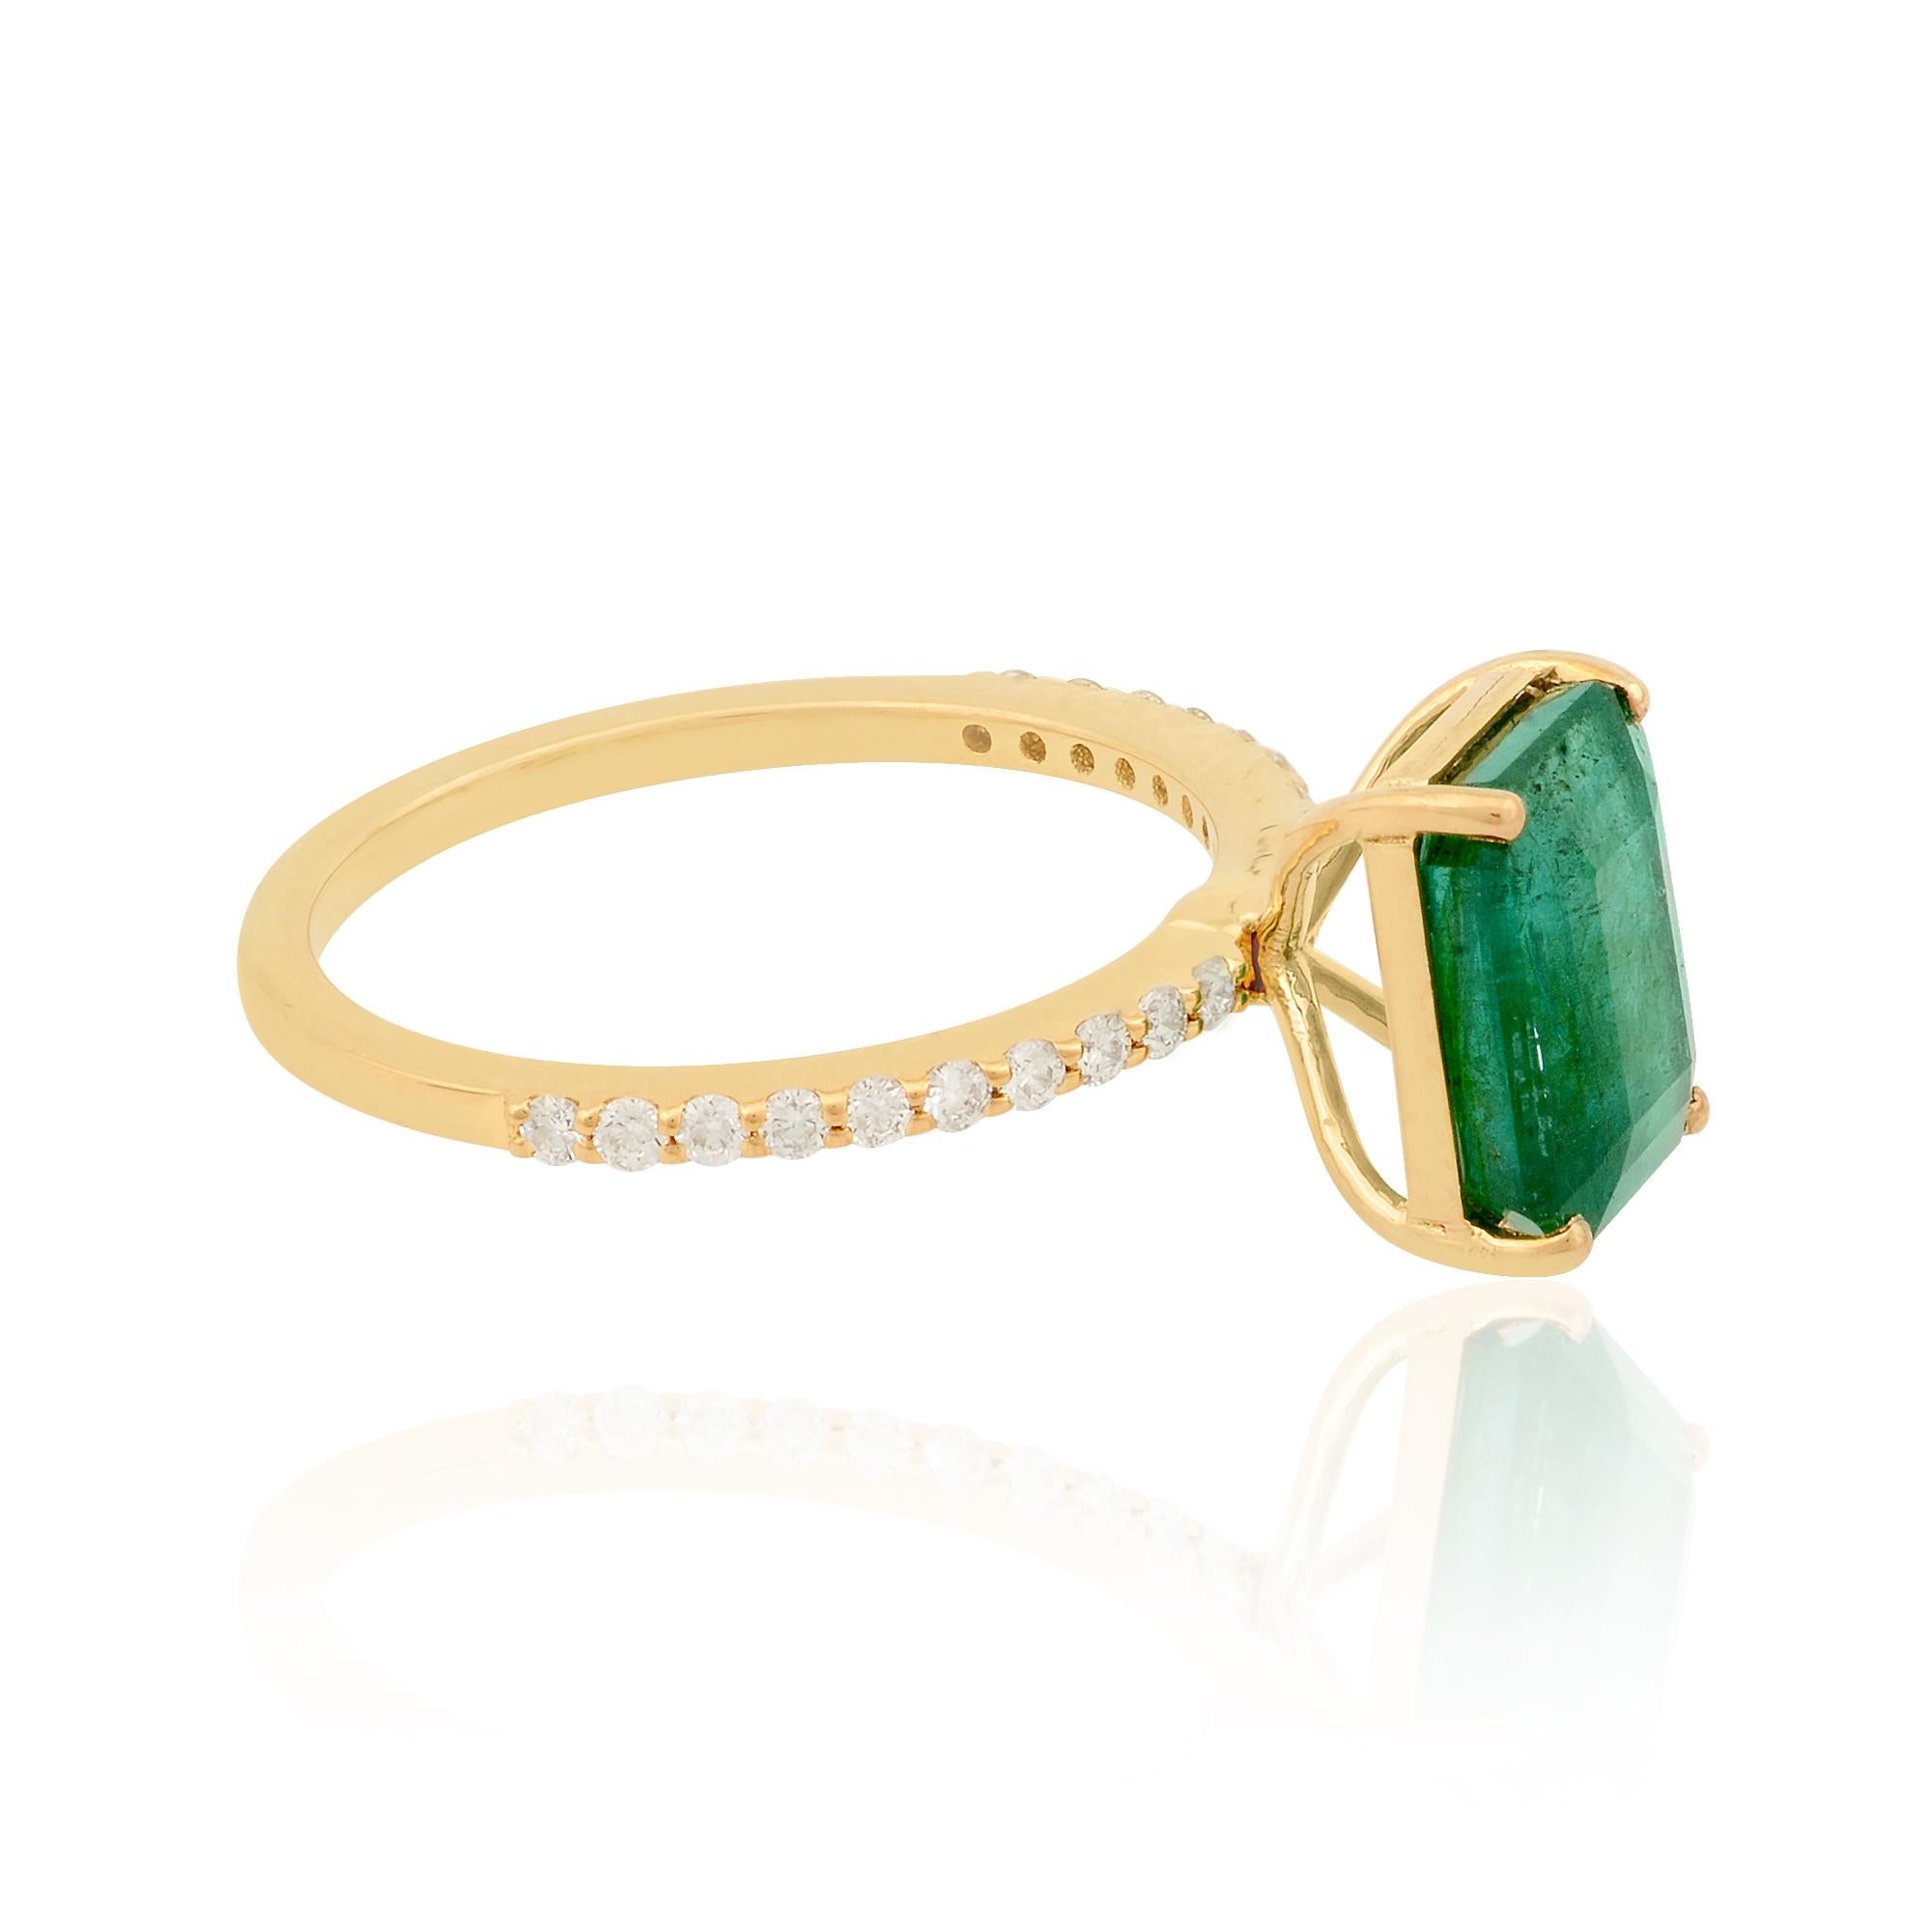 For Sale:  Natural Emerald Gemstone Ring Diamond Pave Solid 18k Yellow Gold Jewelry 2